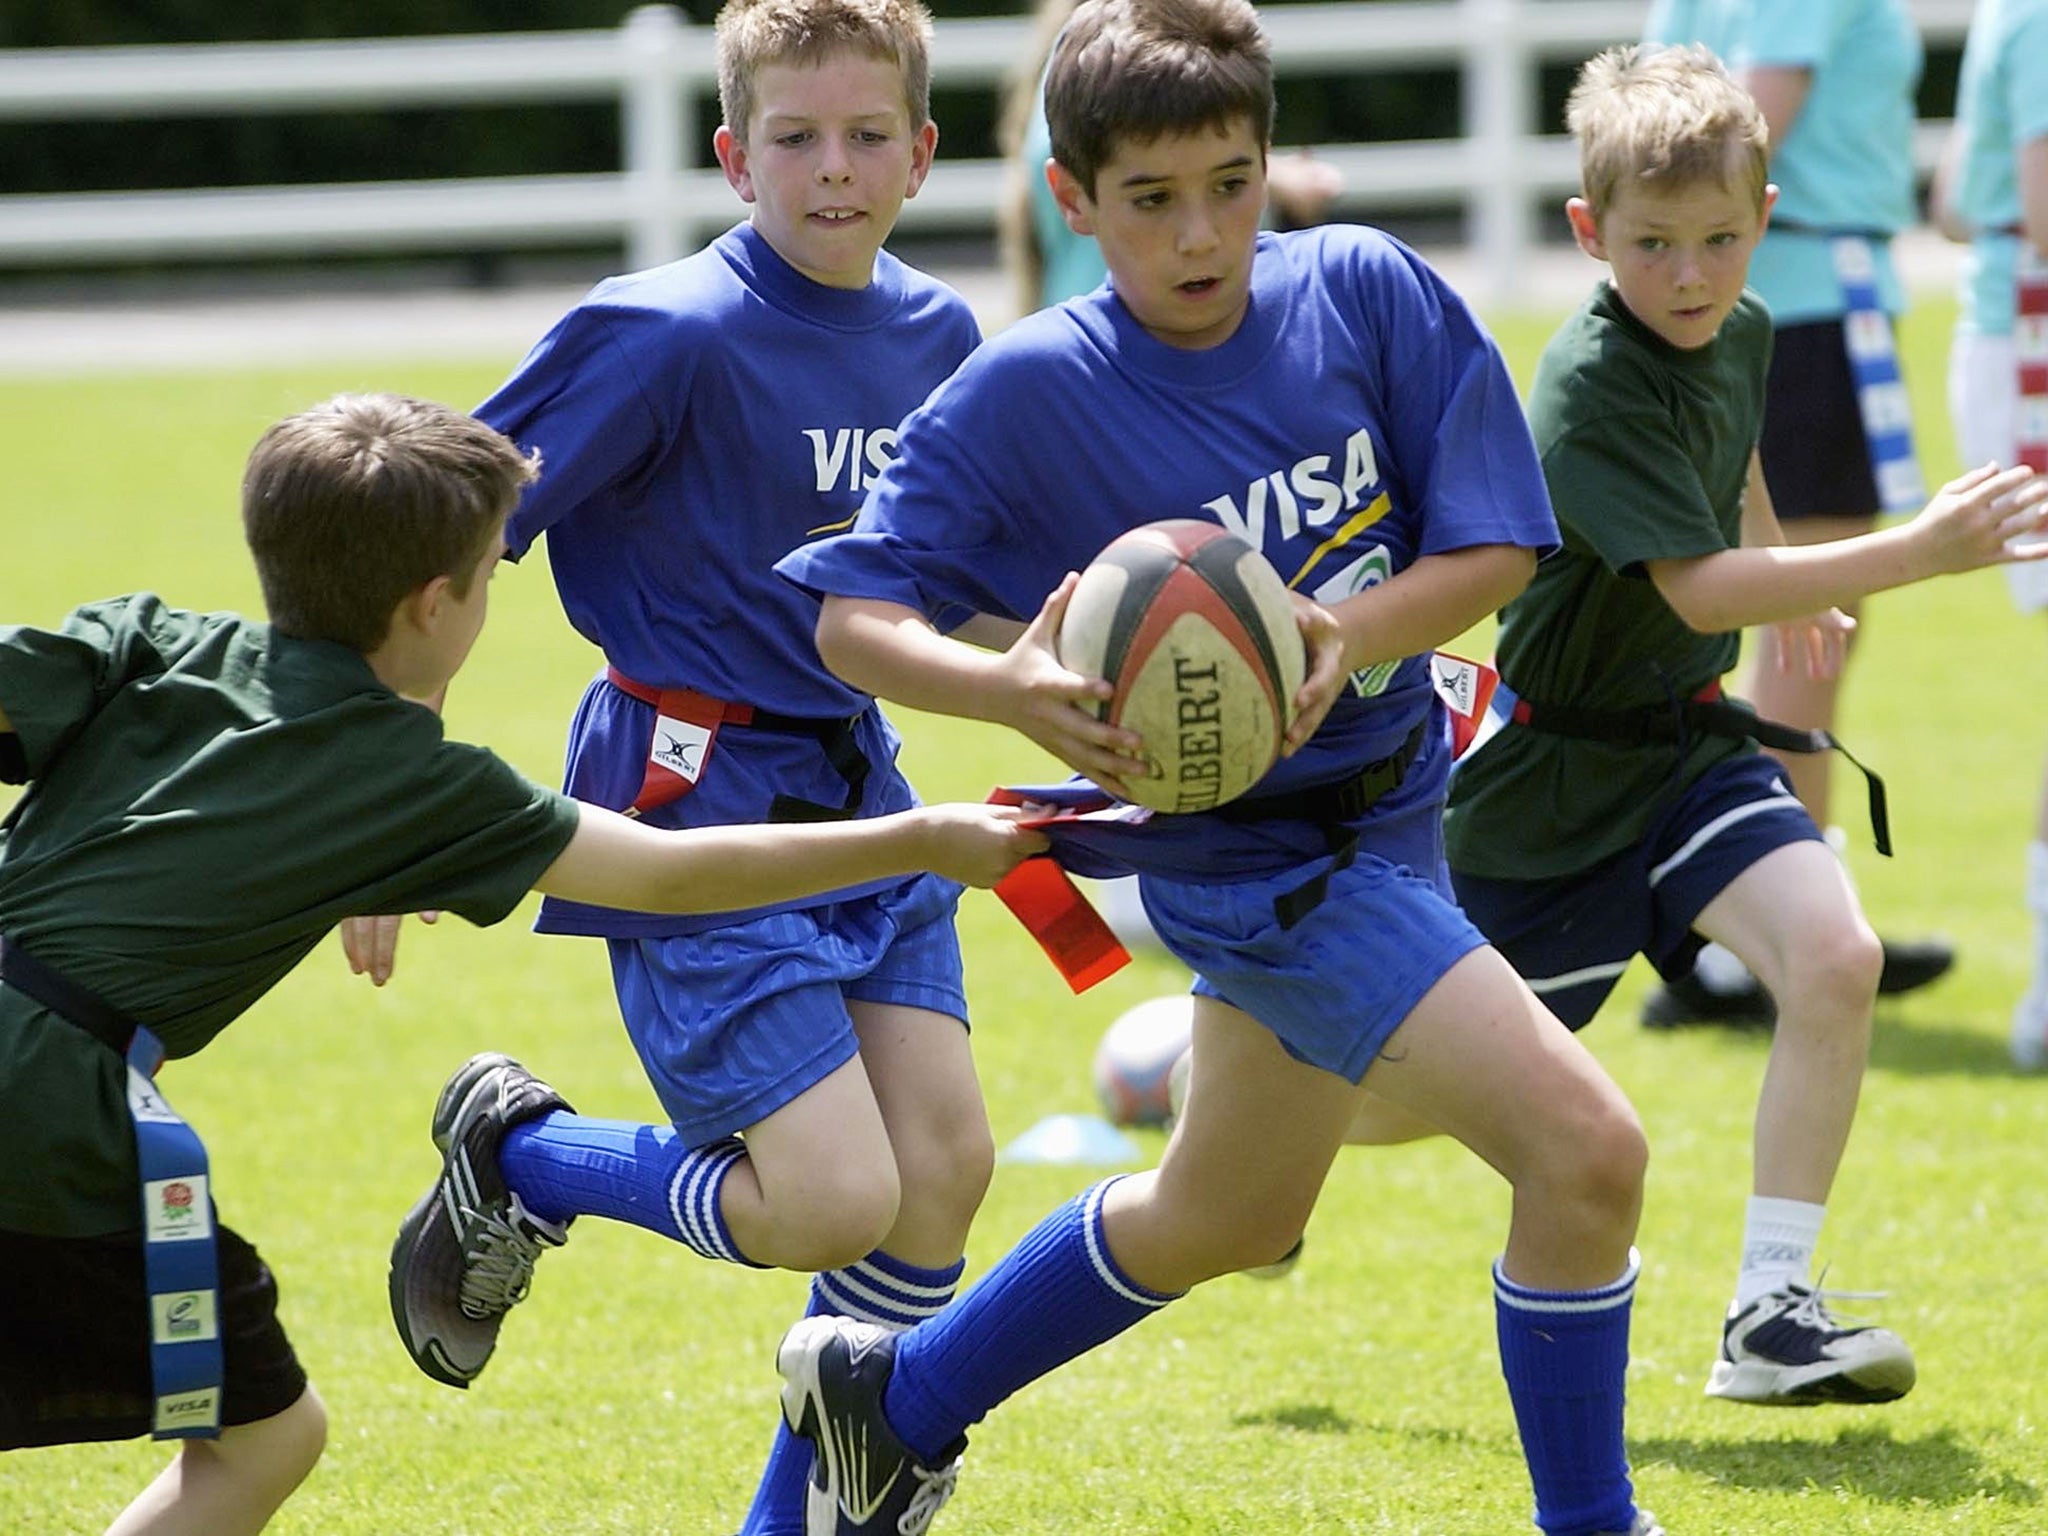 Sports for children should not intentionally harm their brains, says Eric Anderson, a professor of sport at the University of Winchester